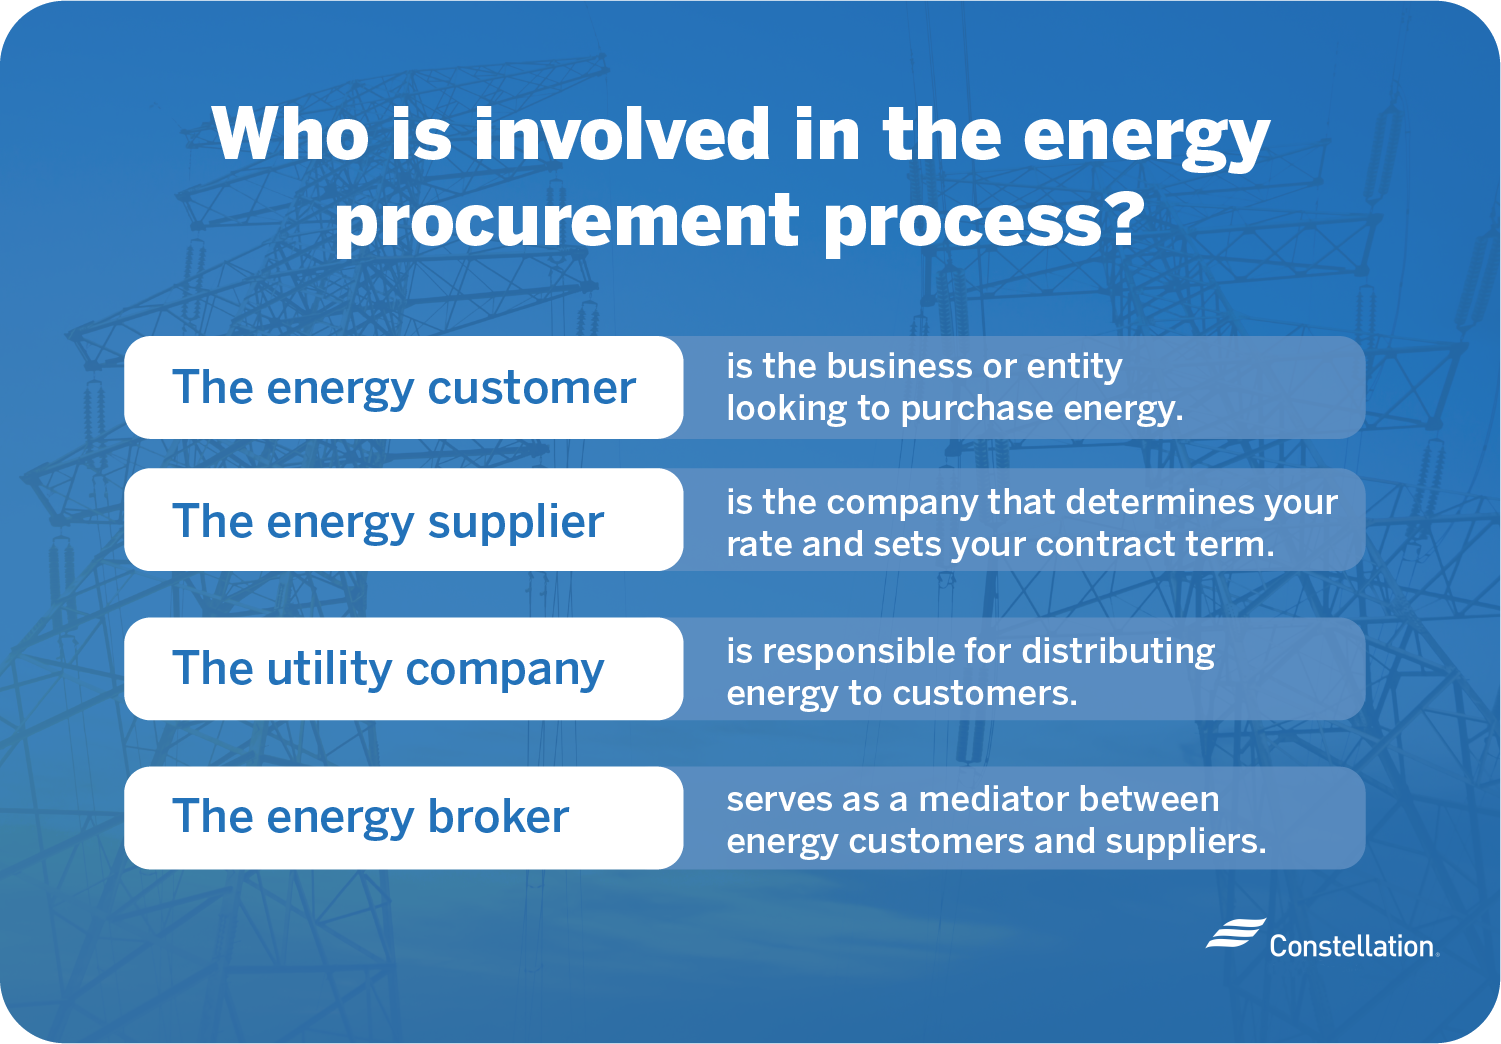 Who is involved in the energy procurement process?